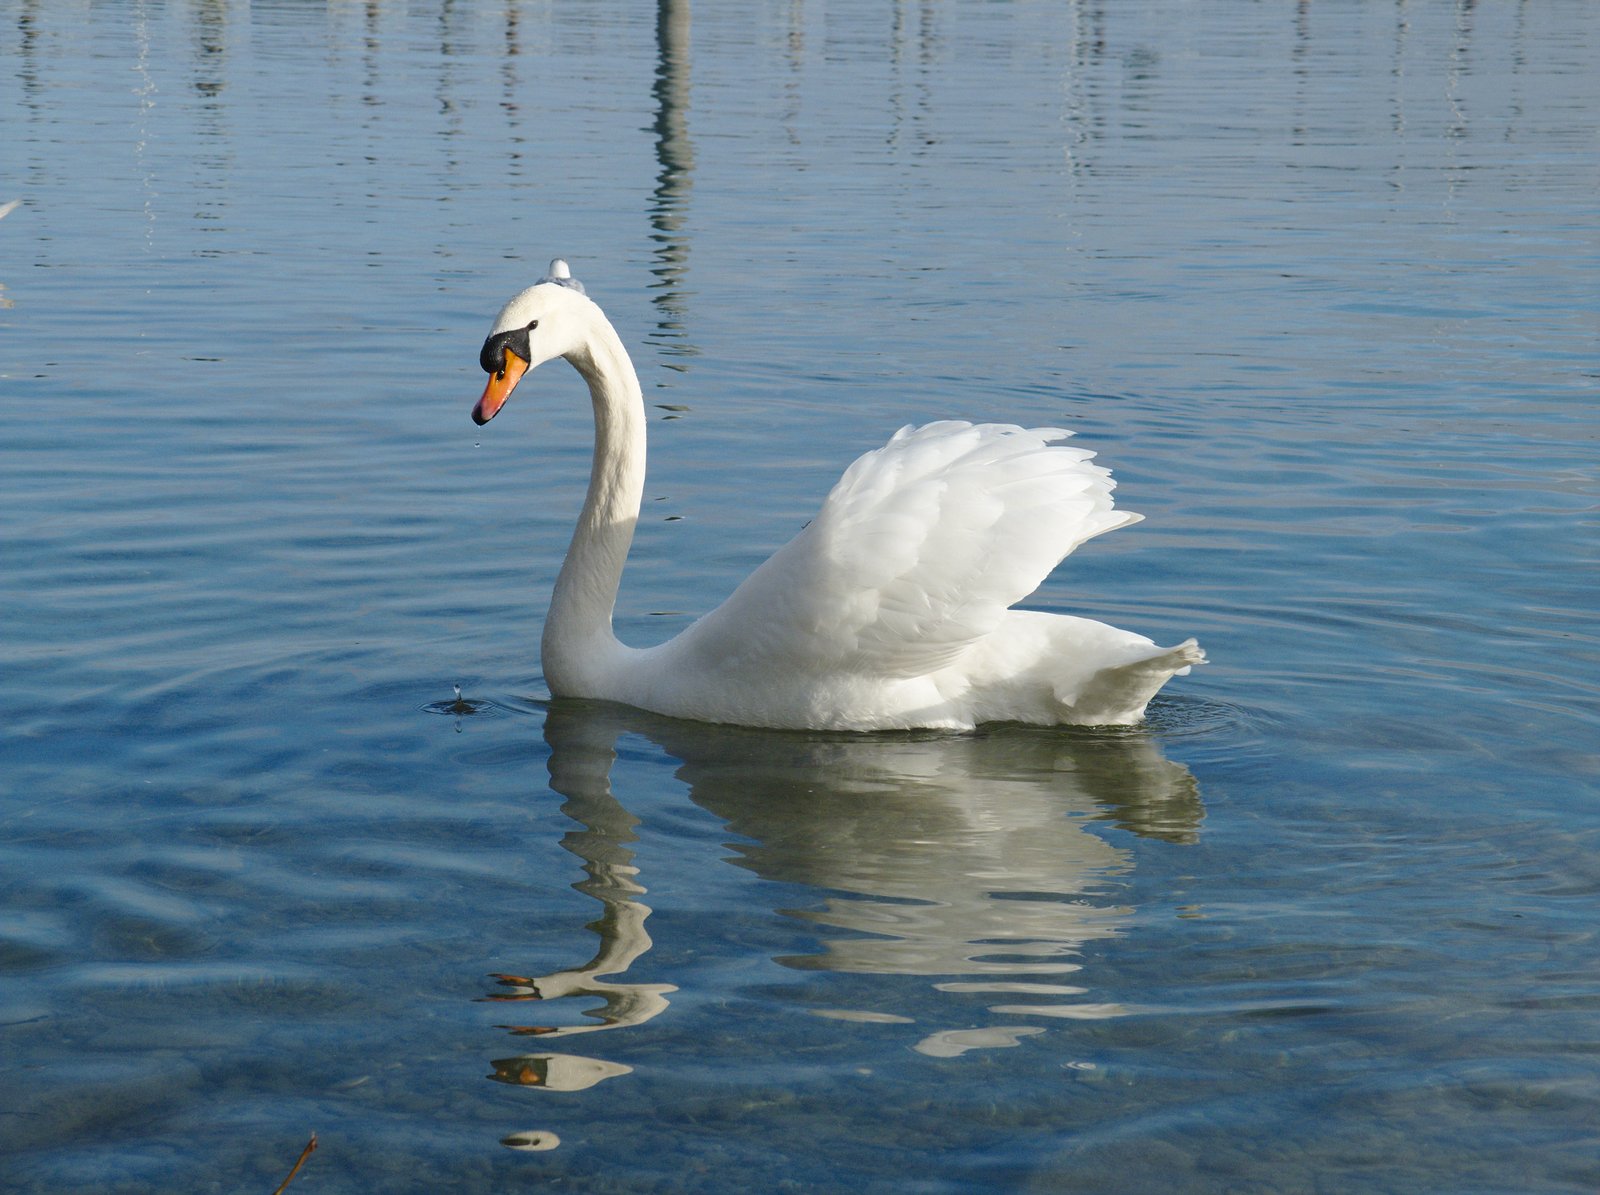 a large white swan is floating on the water